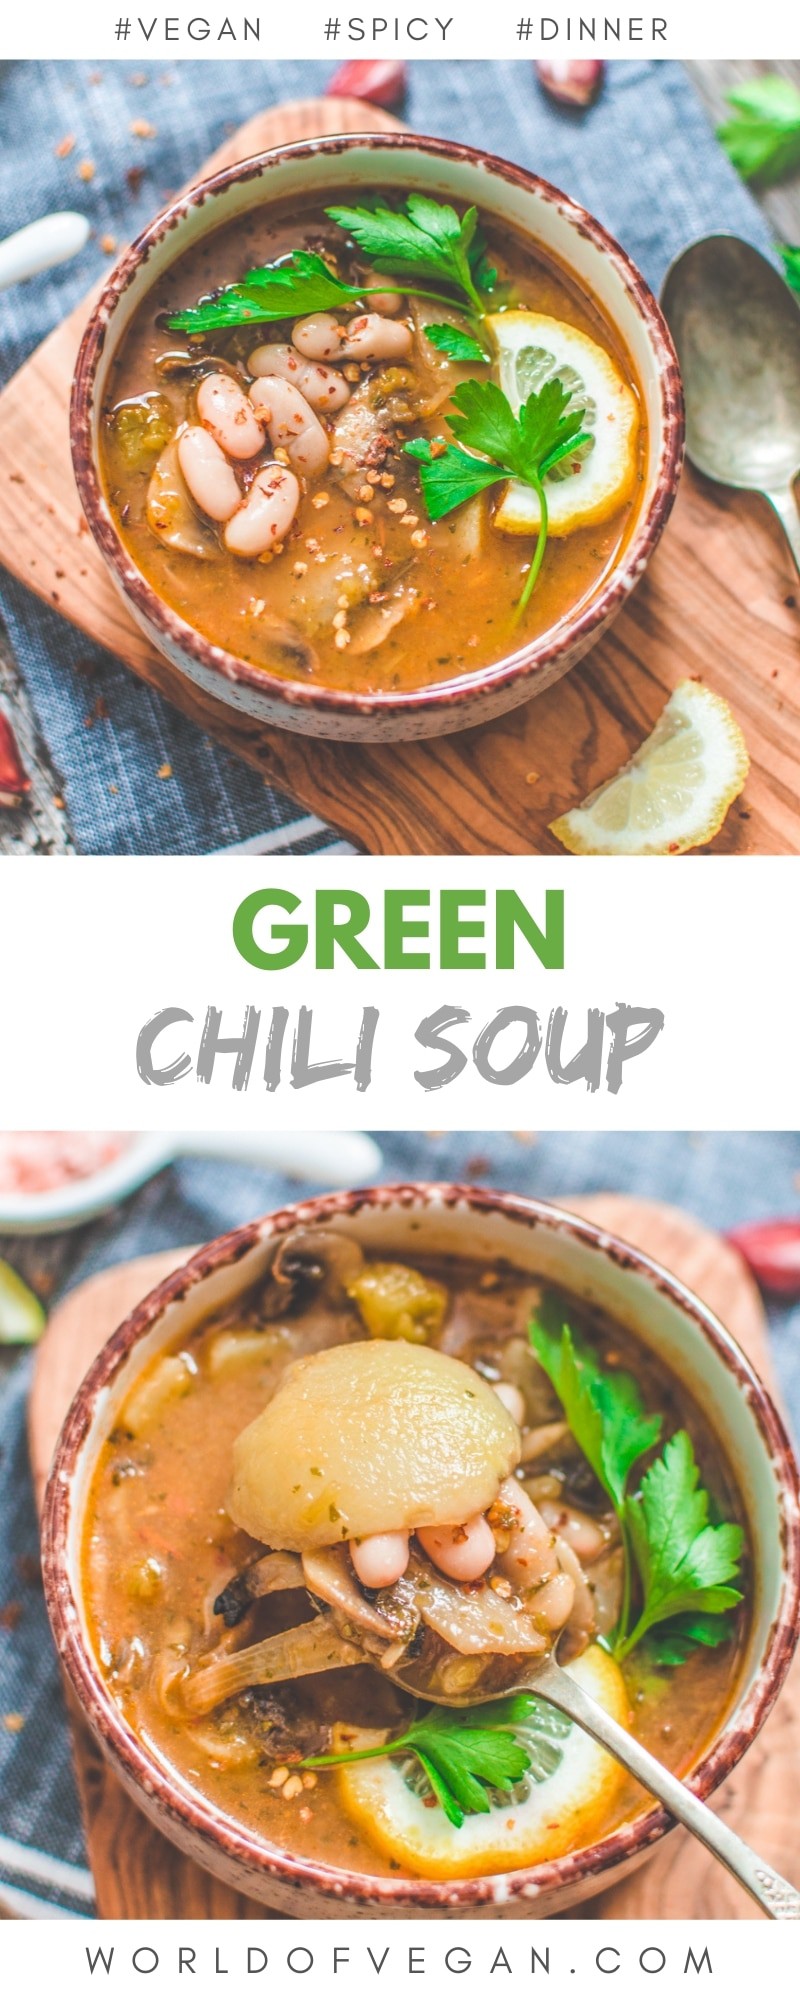 Hearty Vegan Green Chili Soup with Cannellini Beans 